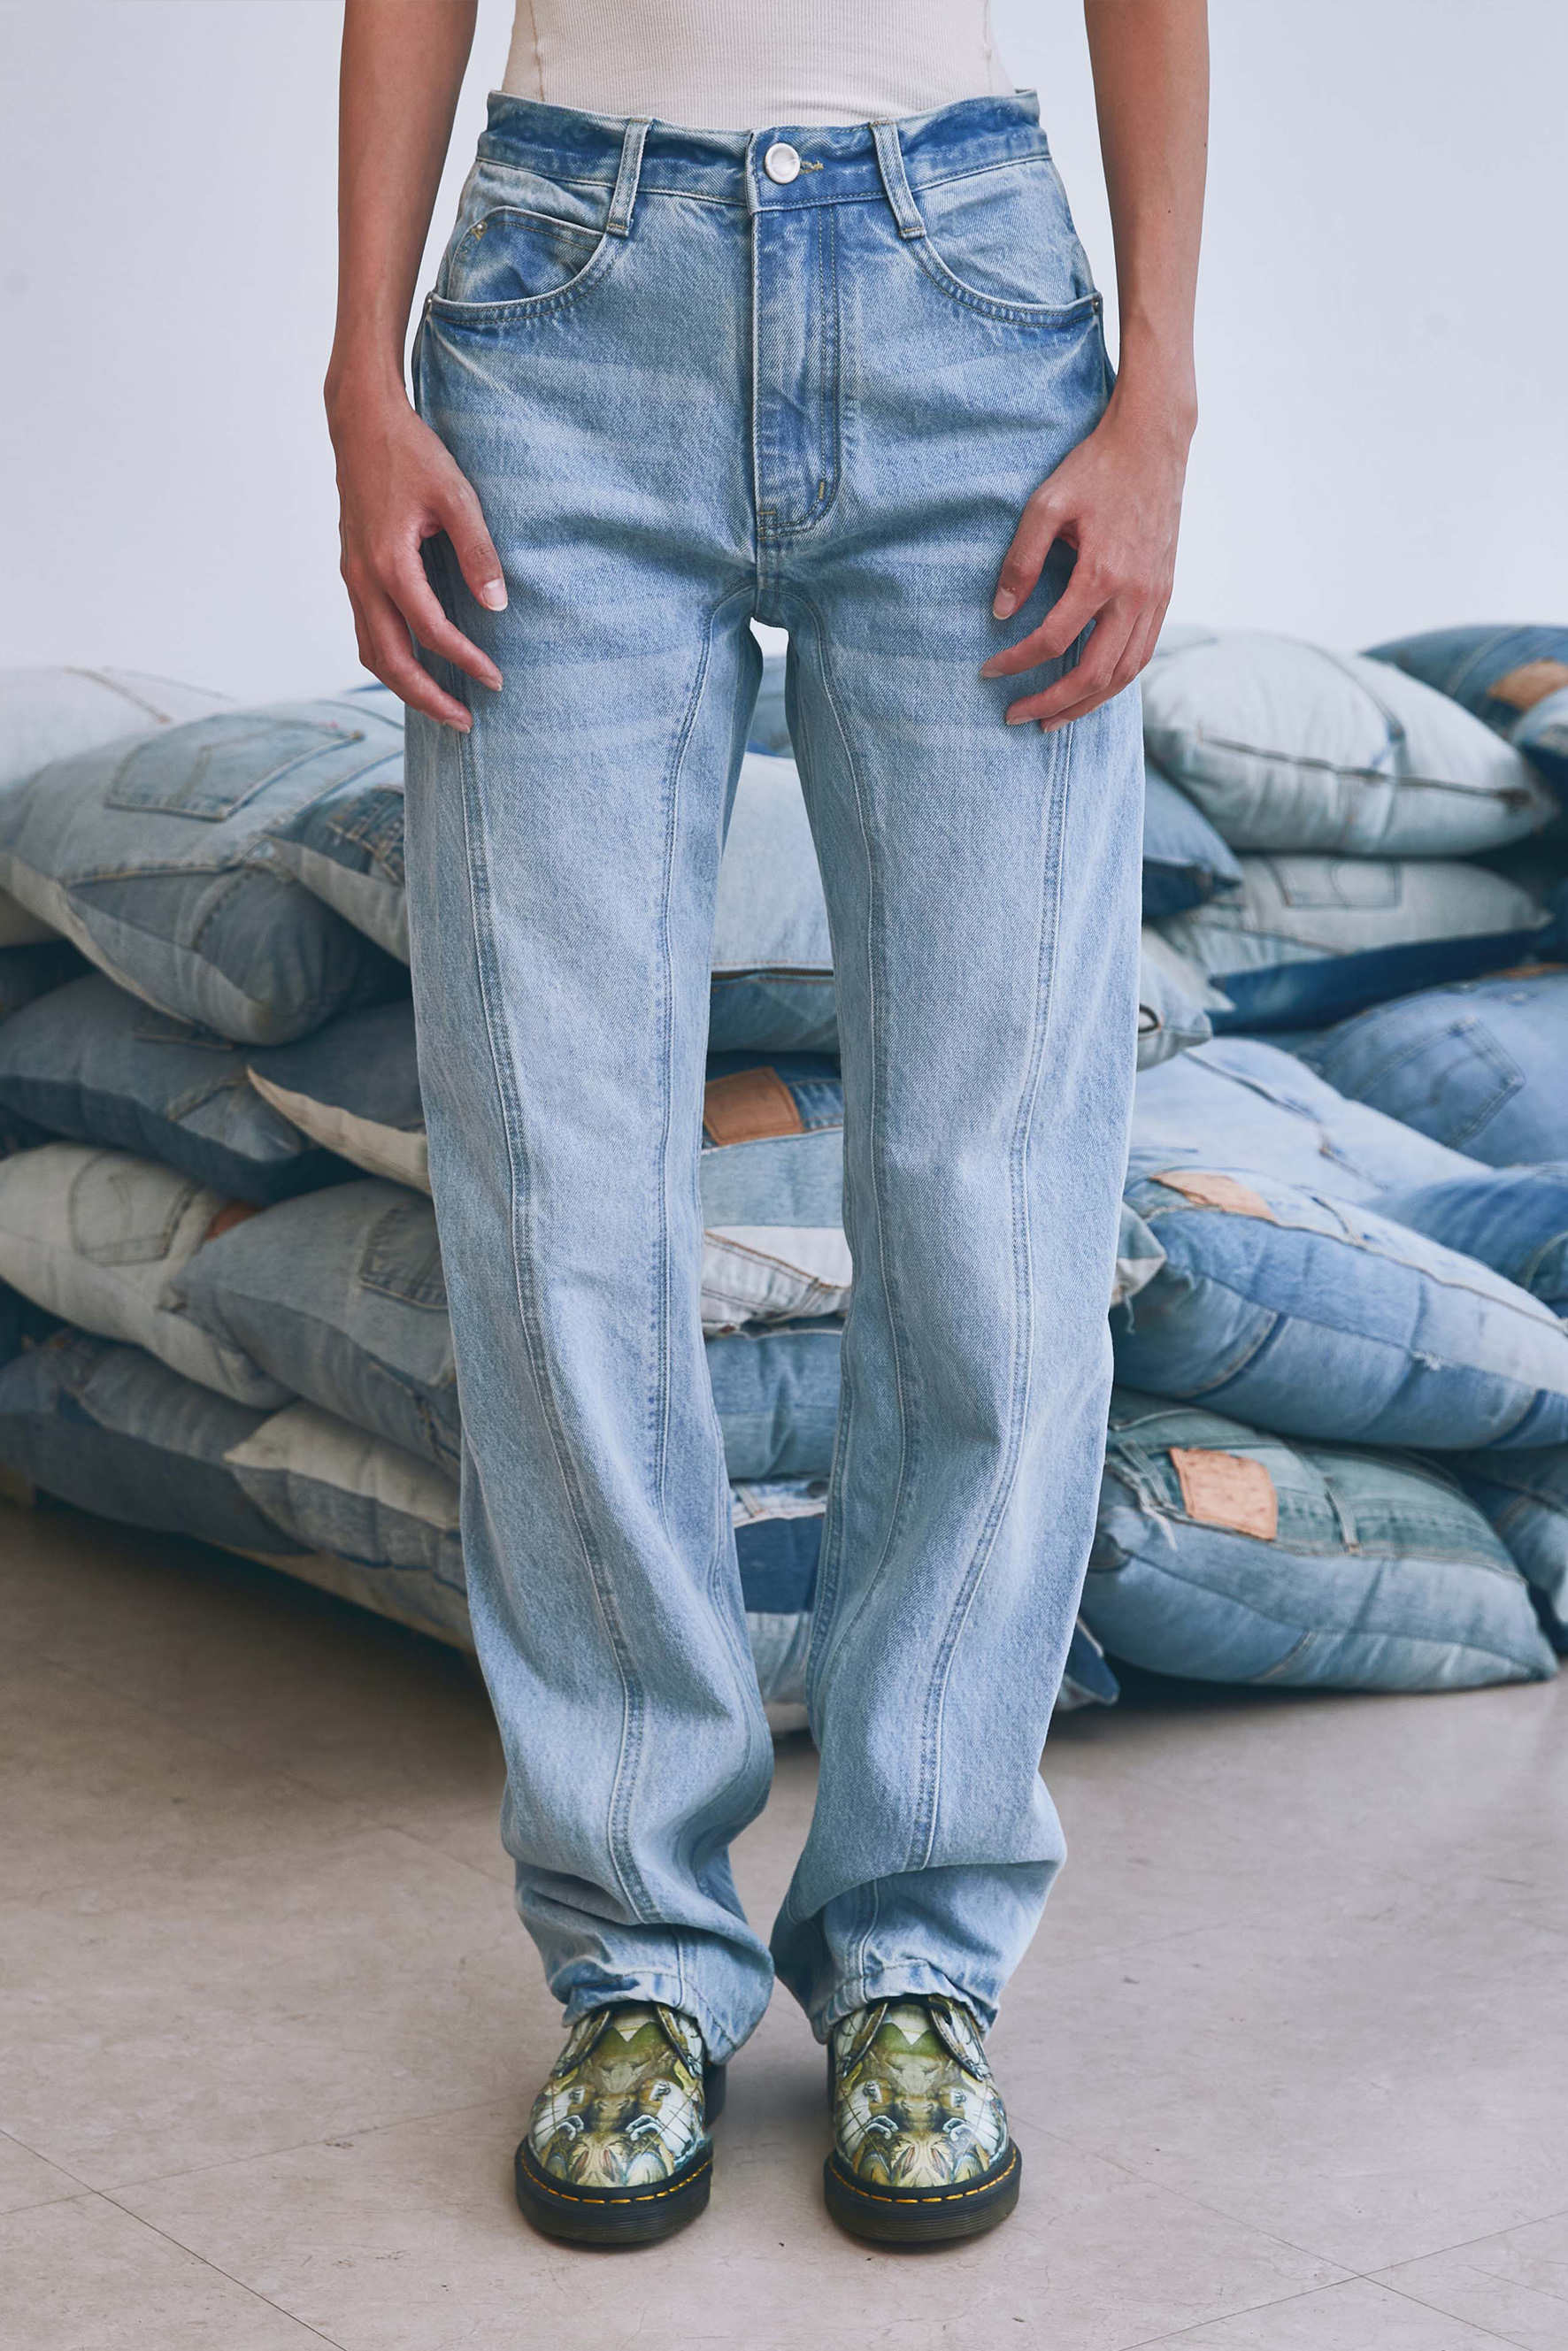 005 A ROUND JEANS